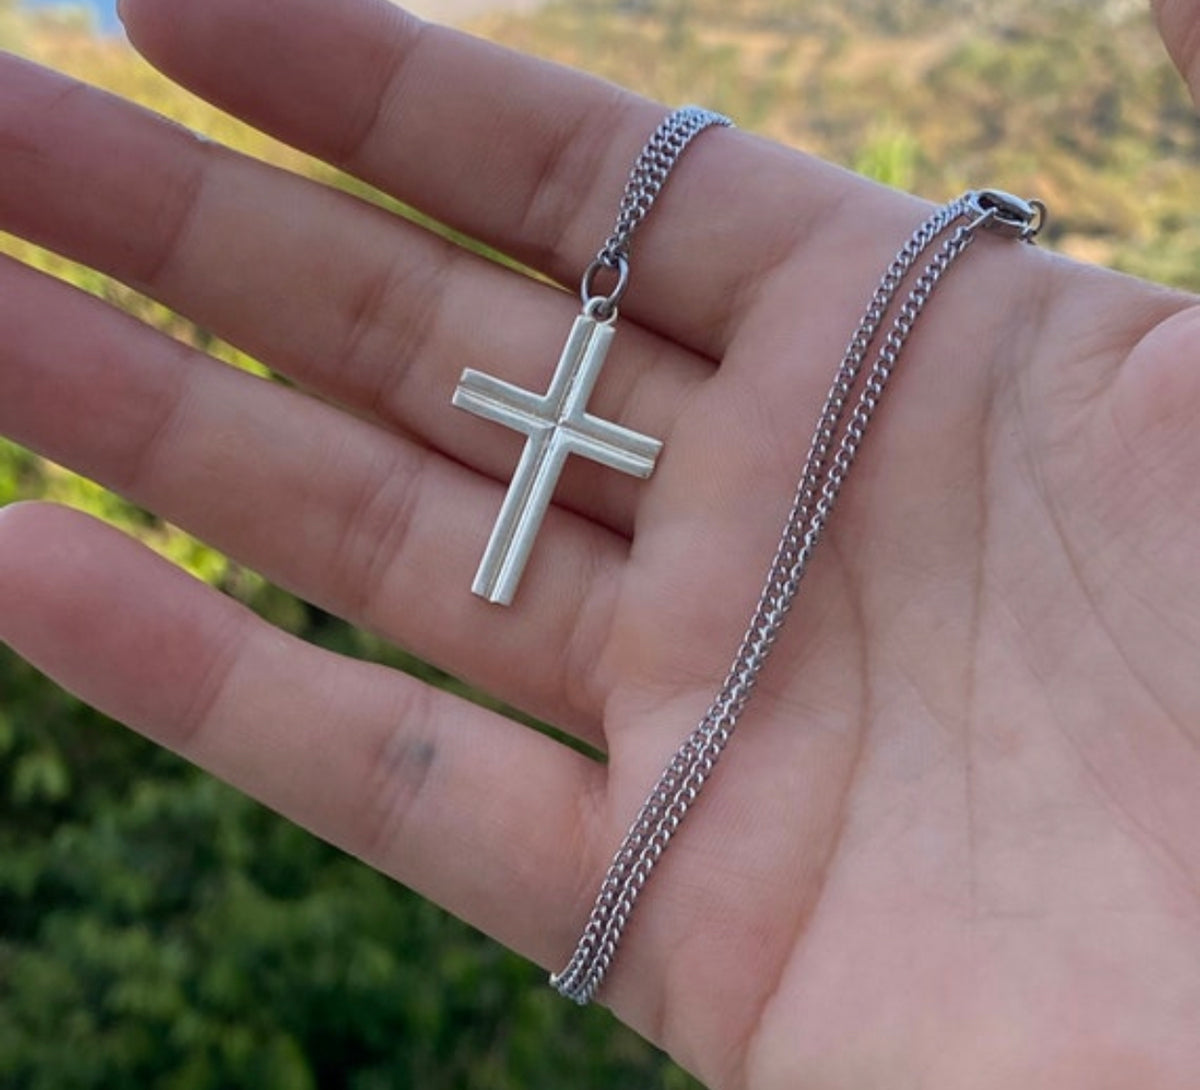 Silver cross necklace with stainless steel chain